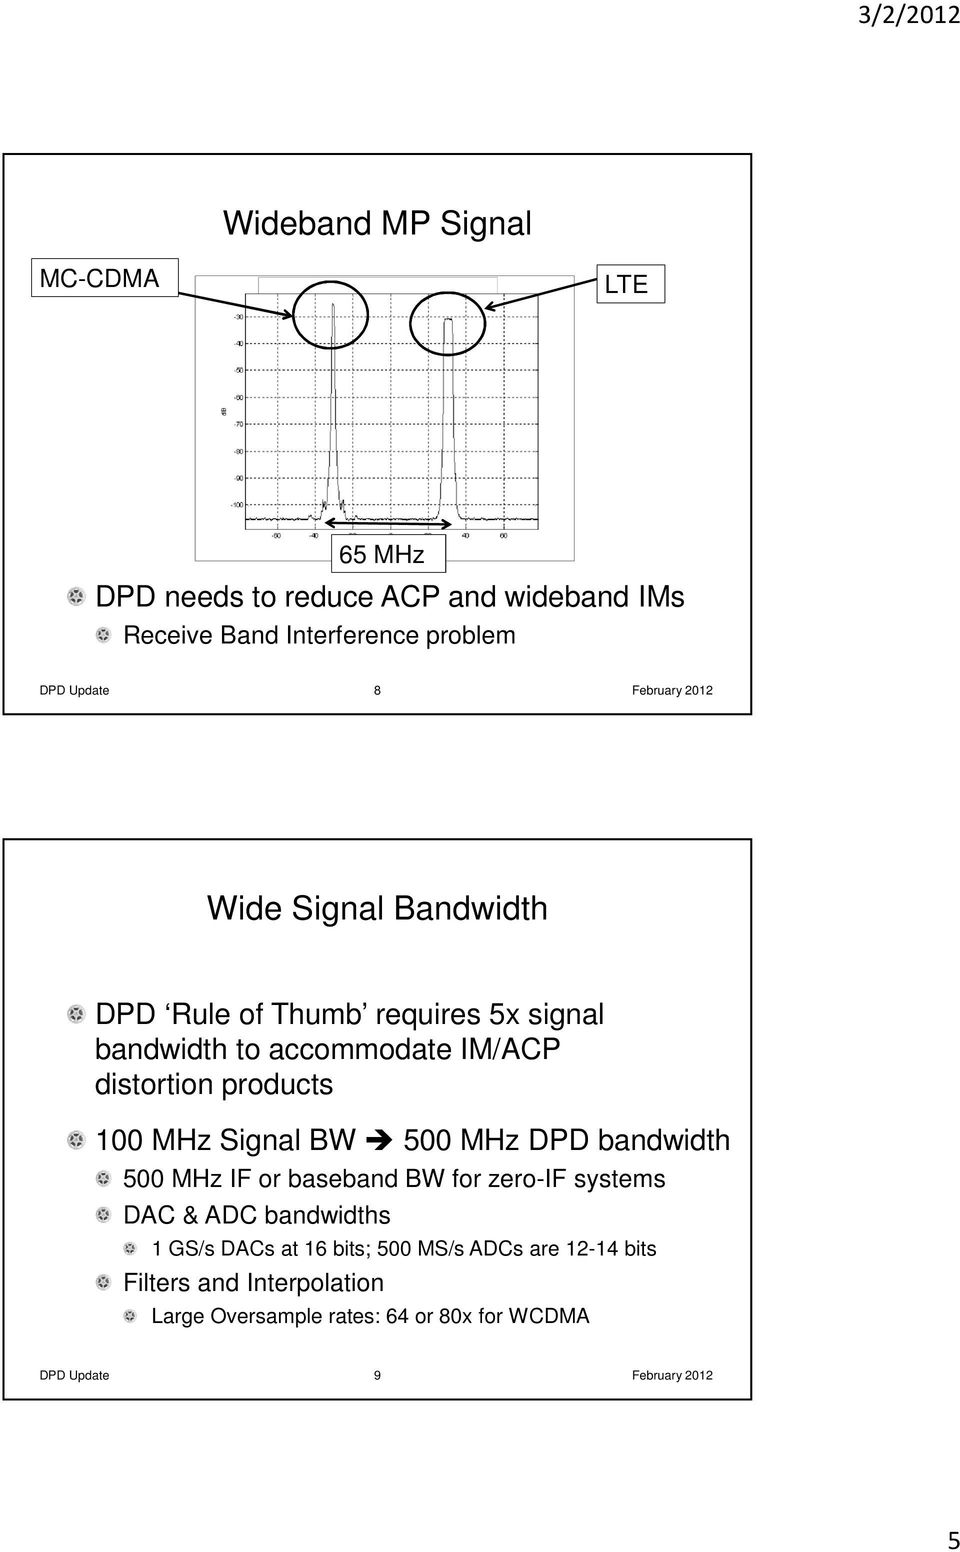 100 MHz Signal BW 500 MHz DPD bandwidth 500 MHz IF or baseband BW for zero-if systems DAC & ADC bandwidths 1 GS/s DACs